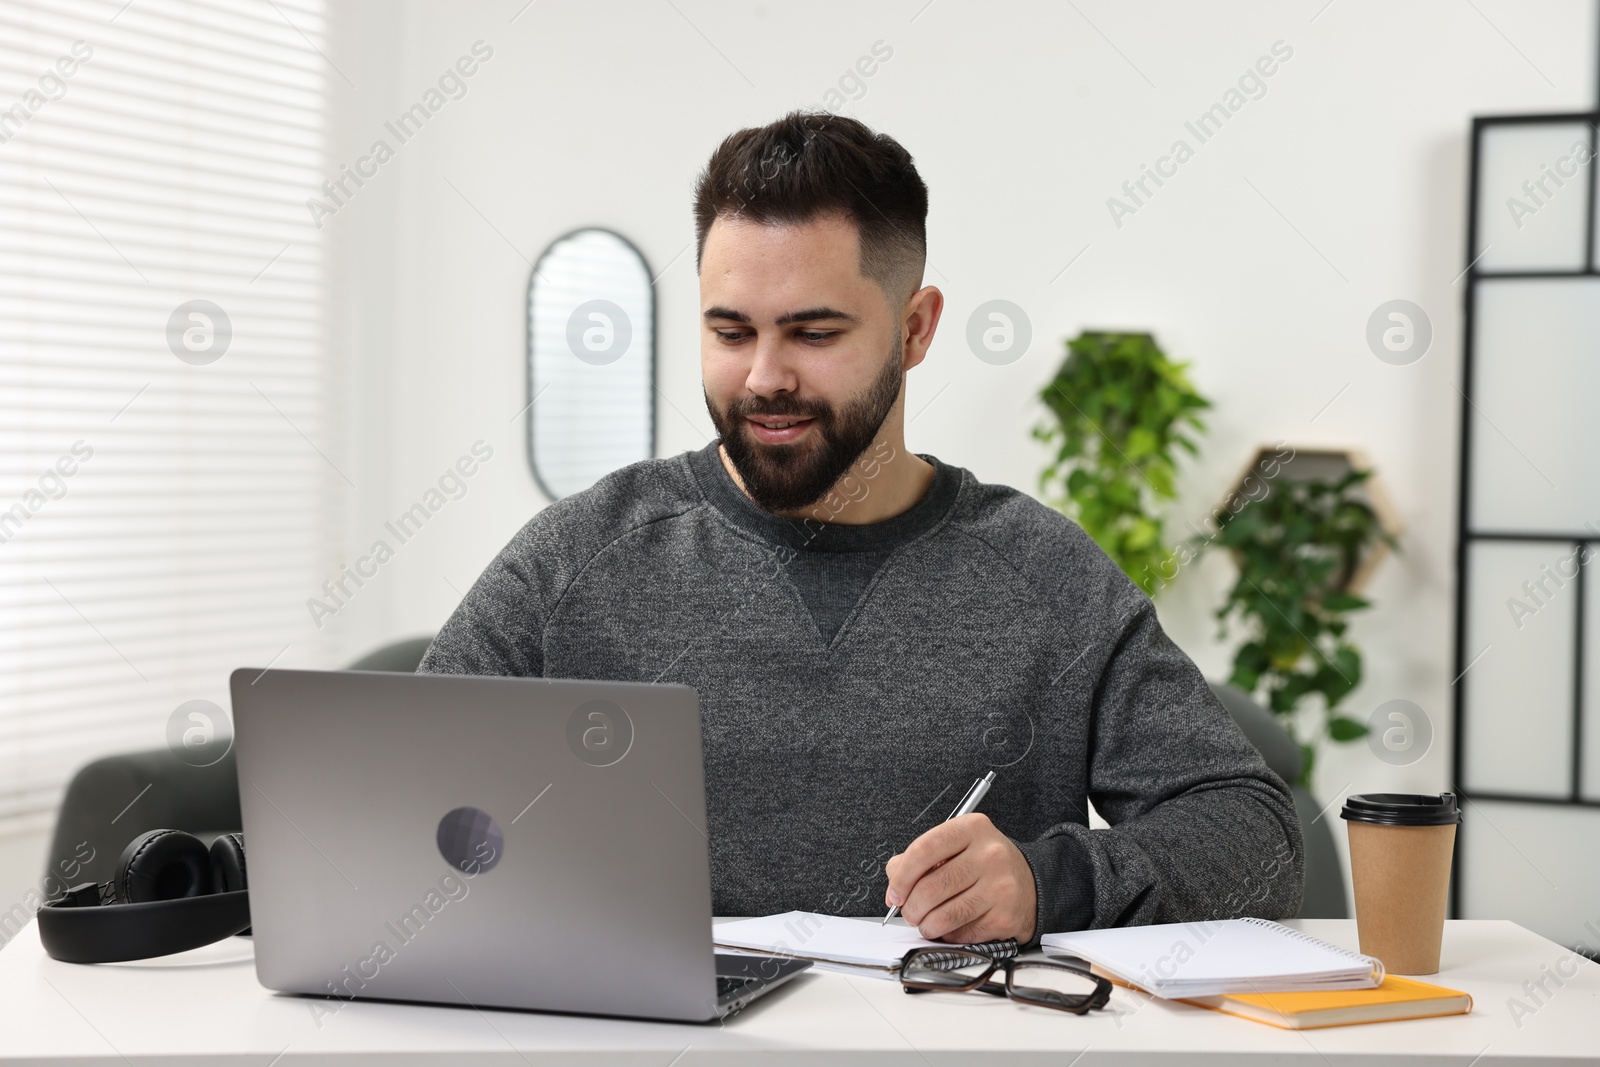 Photo of E-learning. Young man taking notes during online lesson at white table indoors